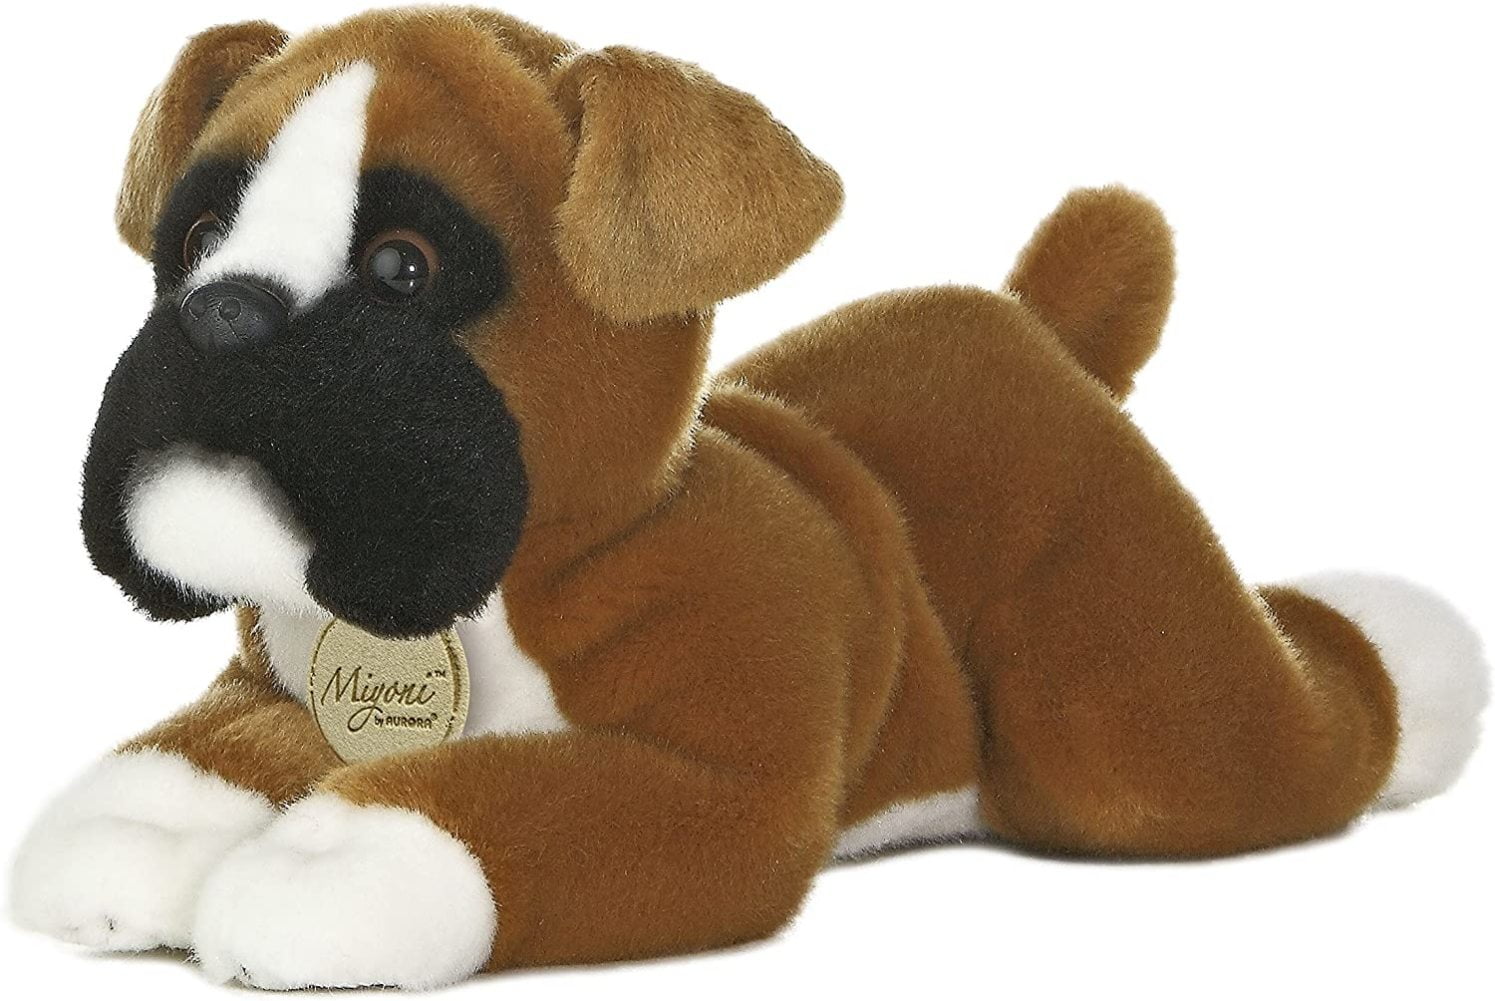 AN450 REALISTIC STUFFED ANIMAL CUDDLY PLUSH SOFT TEDDY LIVING NATURE BOXER DOG 